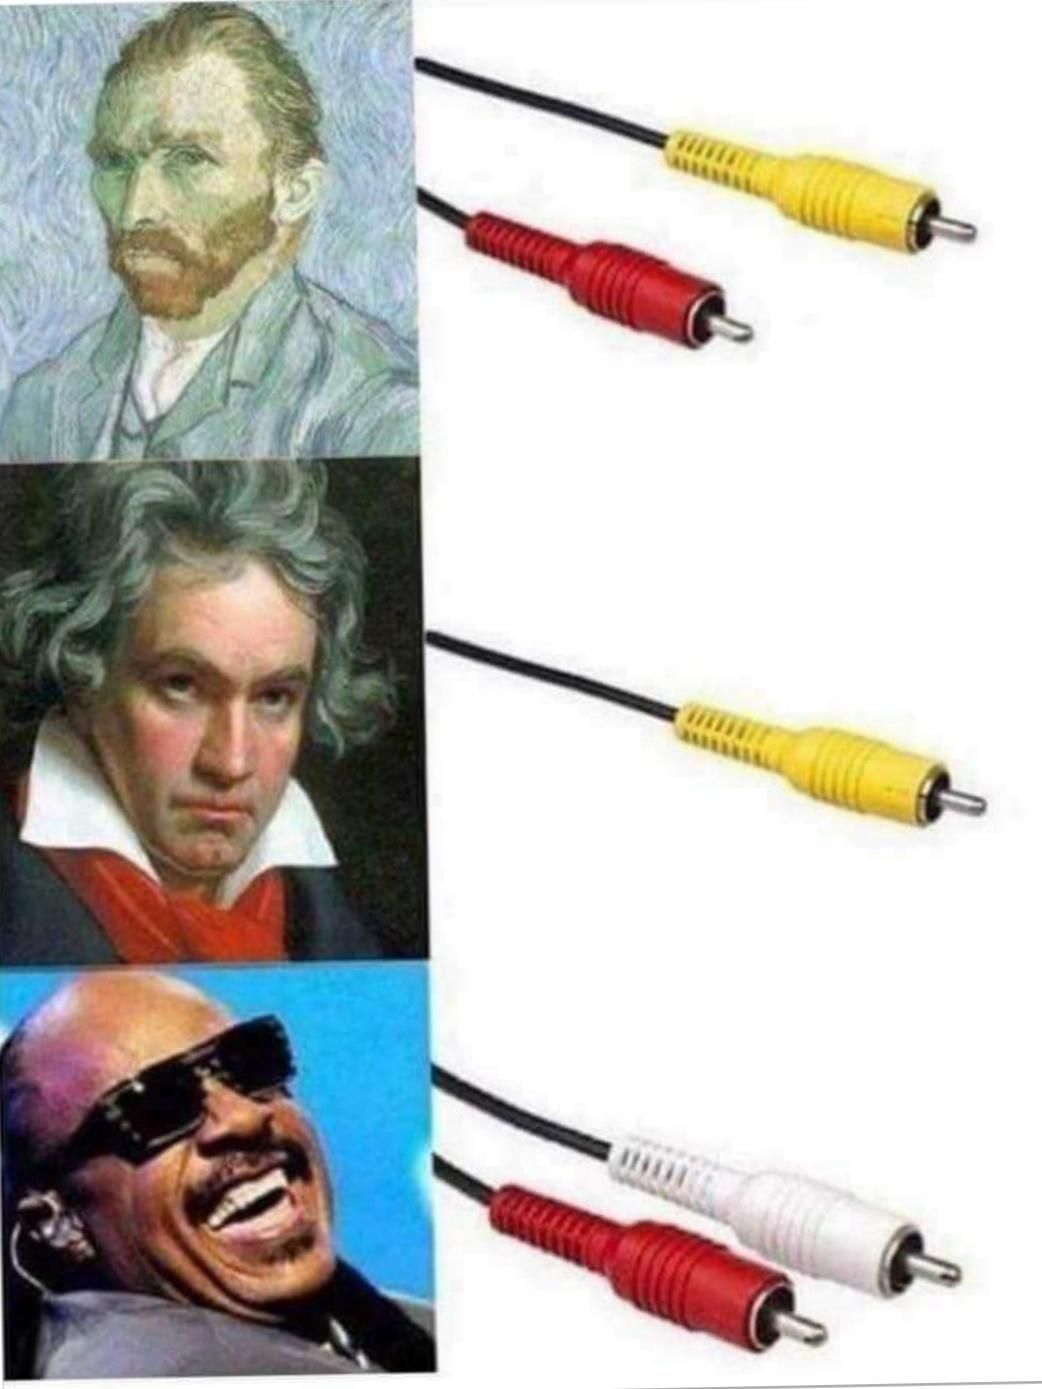 HDMI kids just wouldn't understand